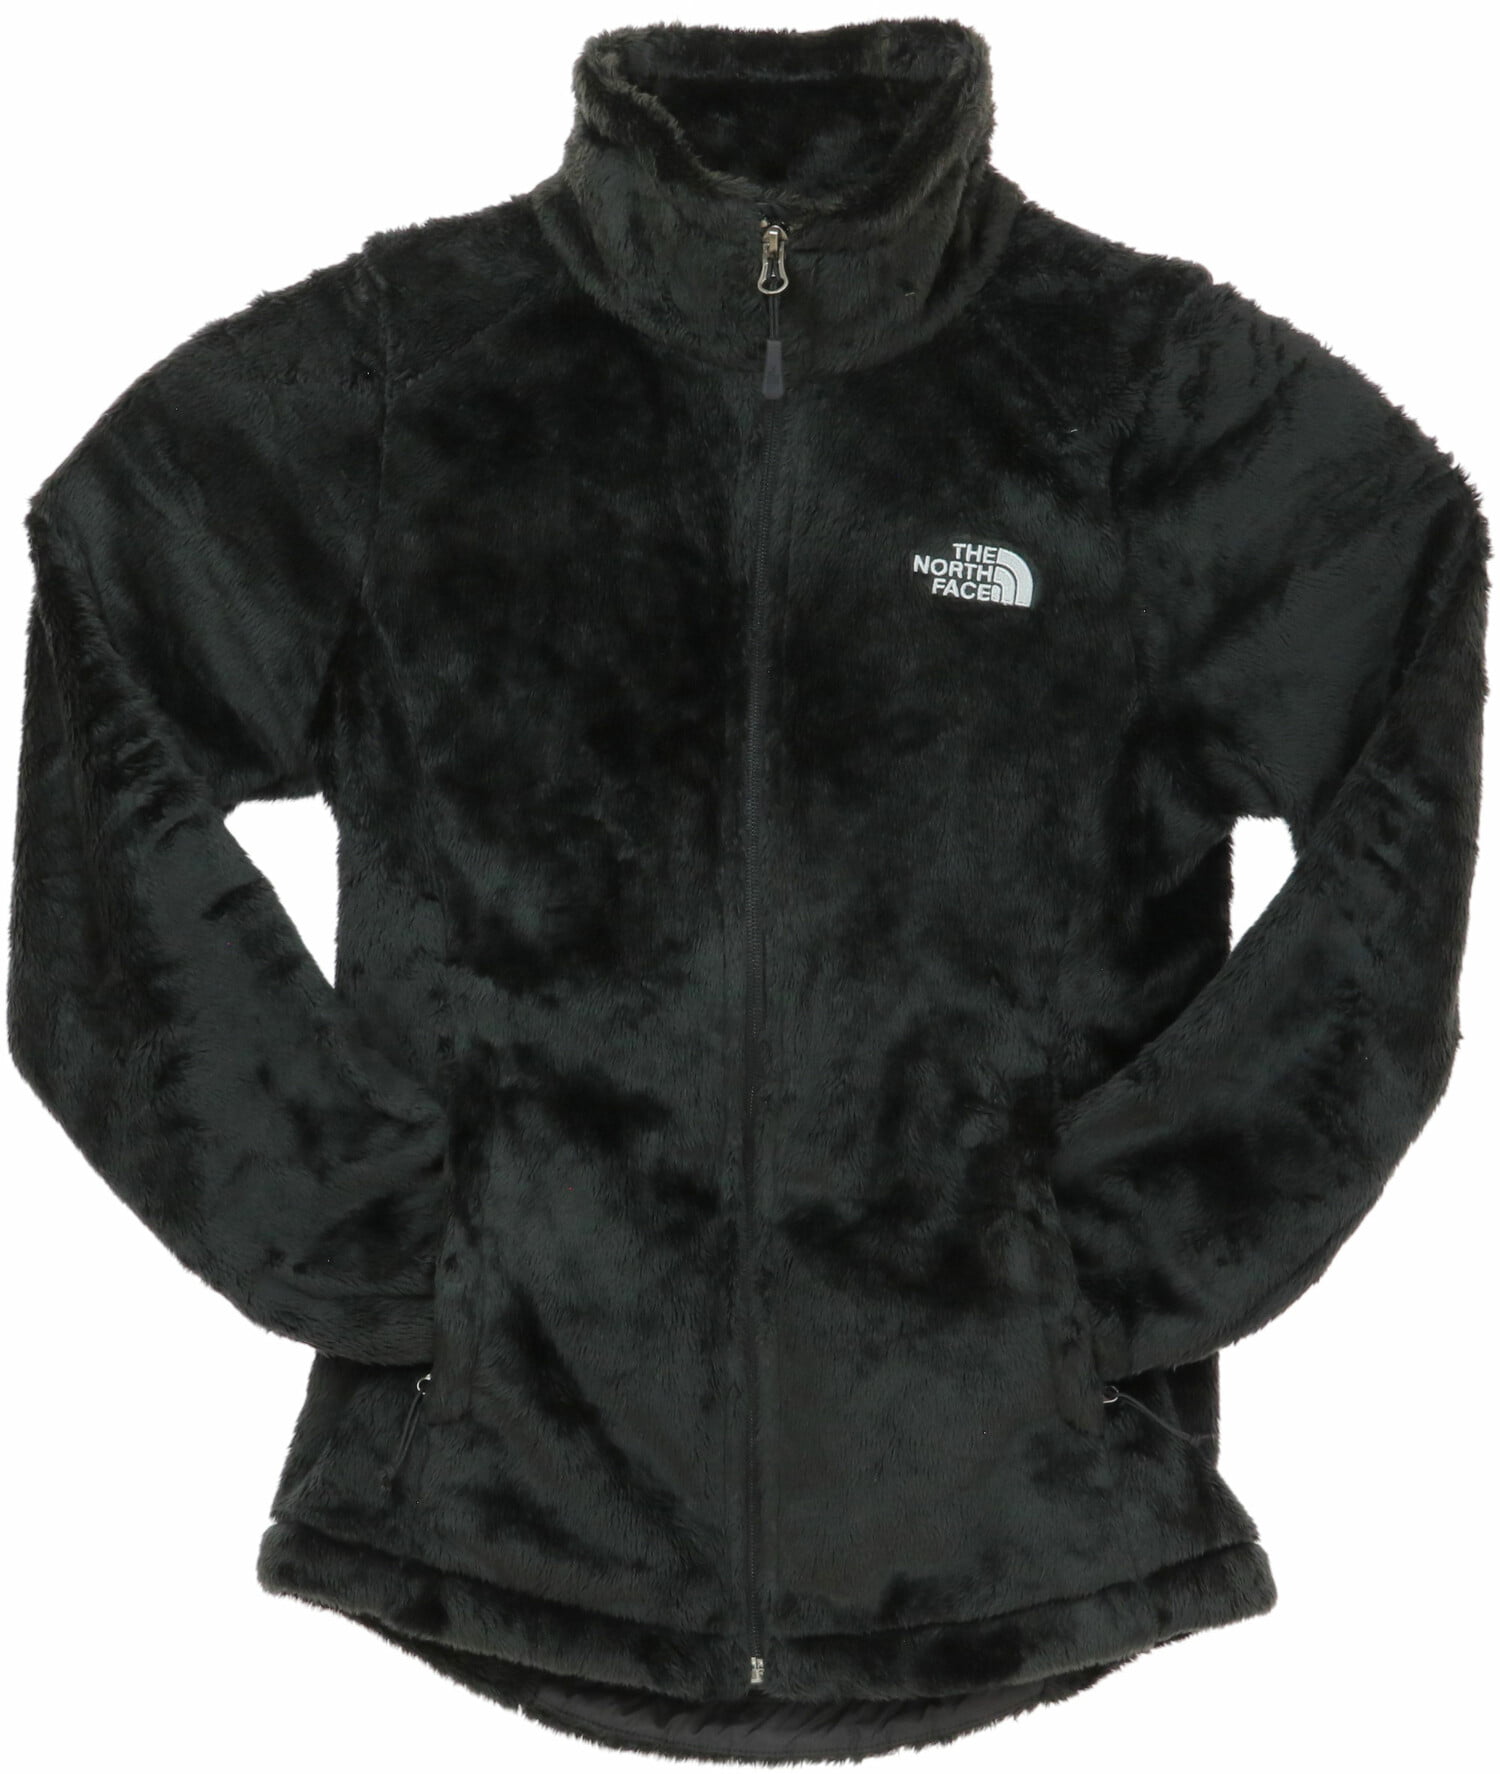 The North Face Women's Osito 2 Fleece Jacket - XS - Recycled Tnf Black ...